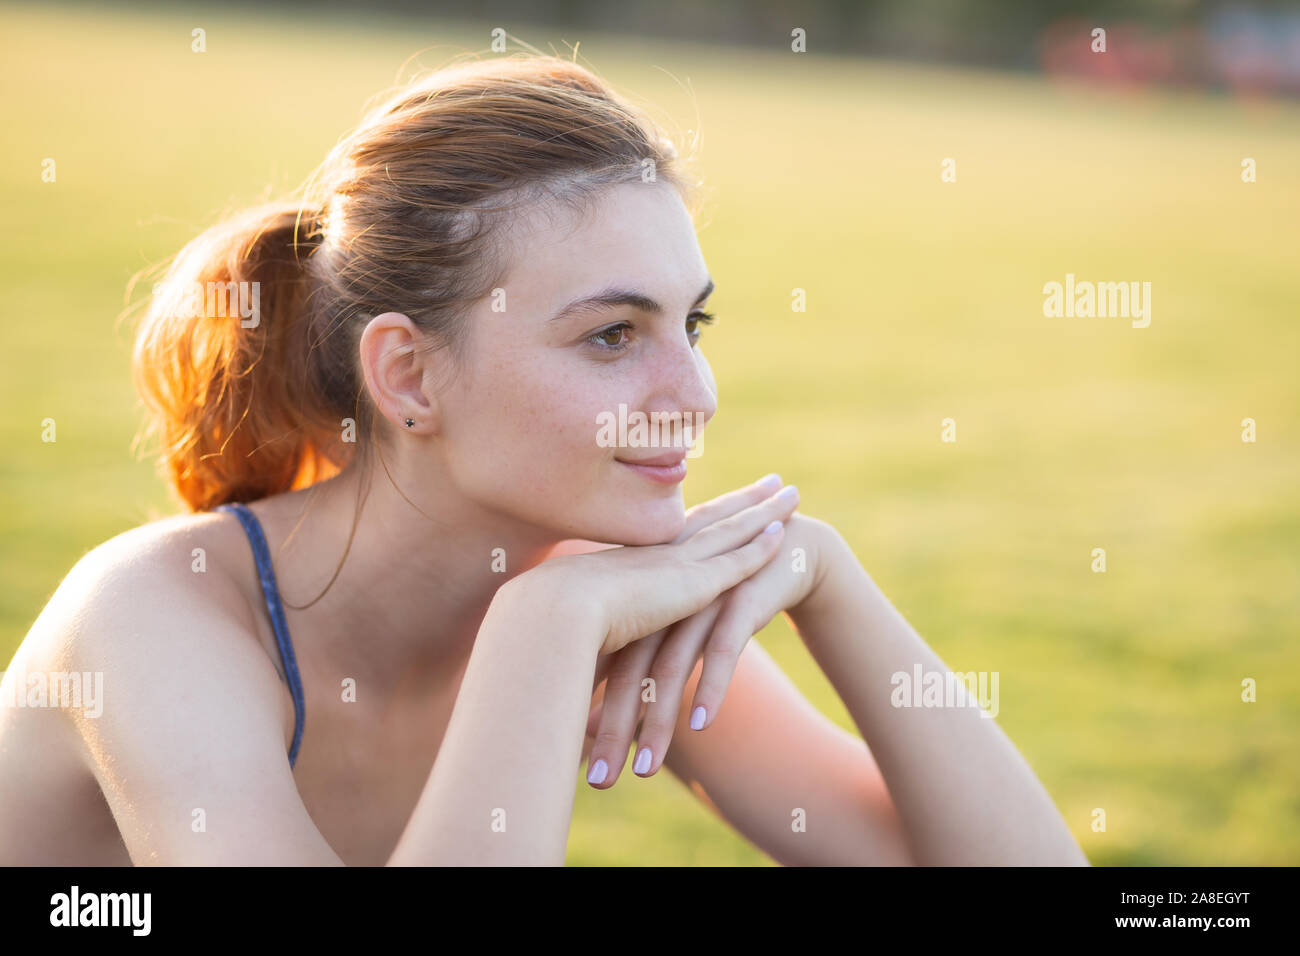 Close up portrait of cheerful smiling young girl with freckles on her face outdoors in sunny summer day. Human expressions and emotions concept. Stock Photo